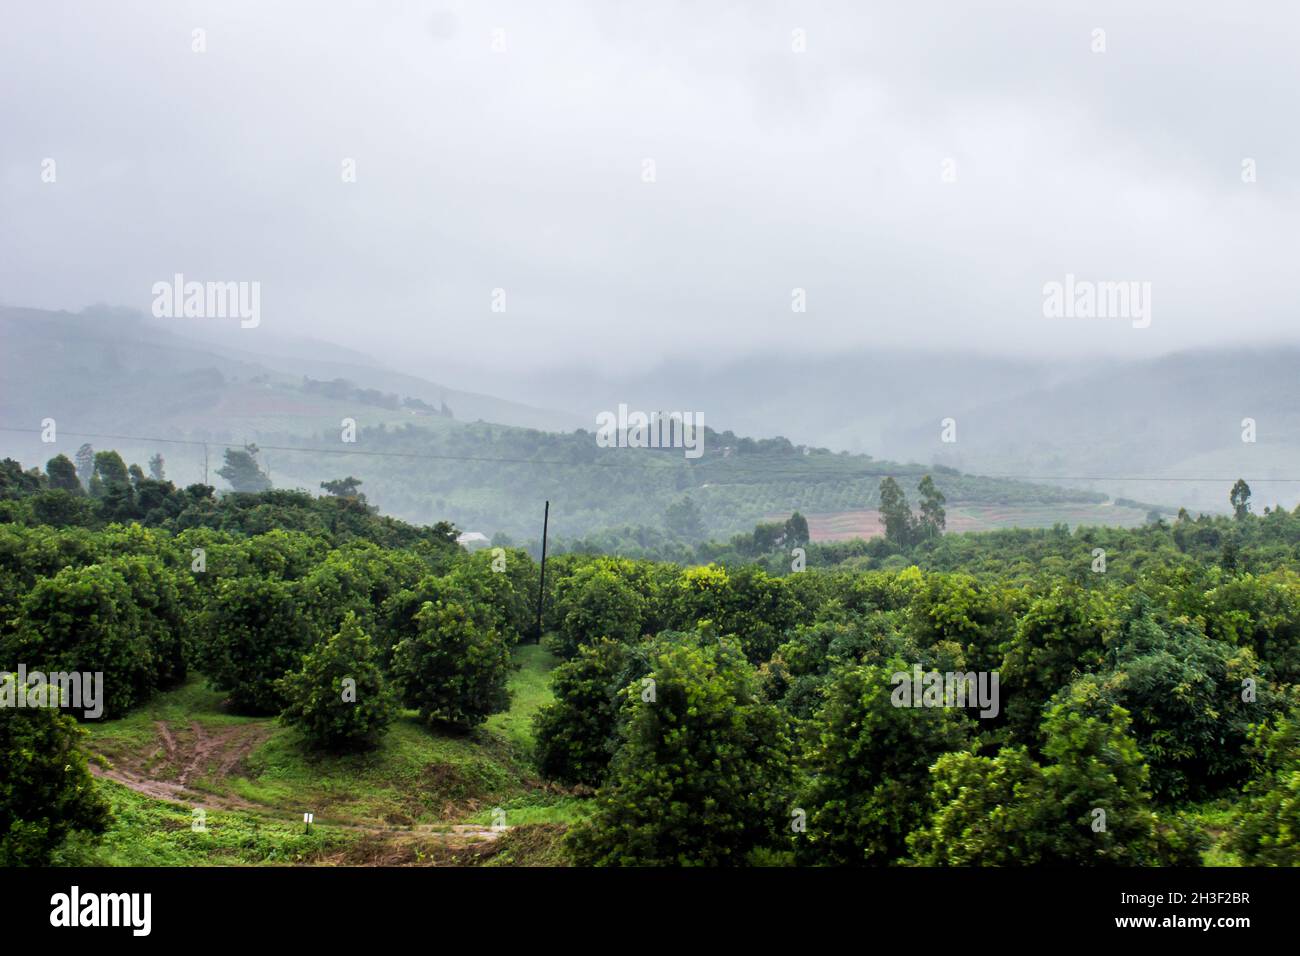 The Wolkberg Mountains, shrouded in a thick blanket of fog, with a fruit orchard in the foreground, just outside Tzaneen, South Africa Stock Photo